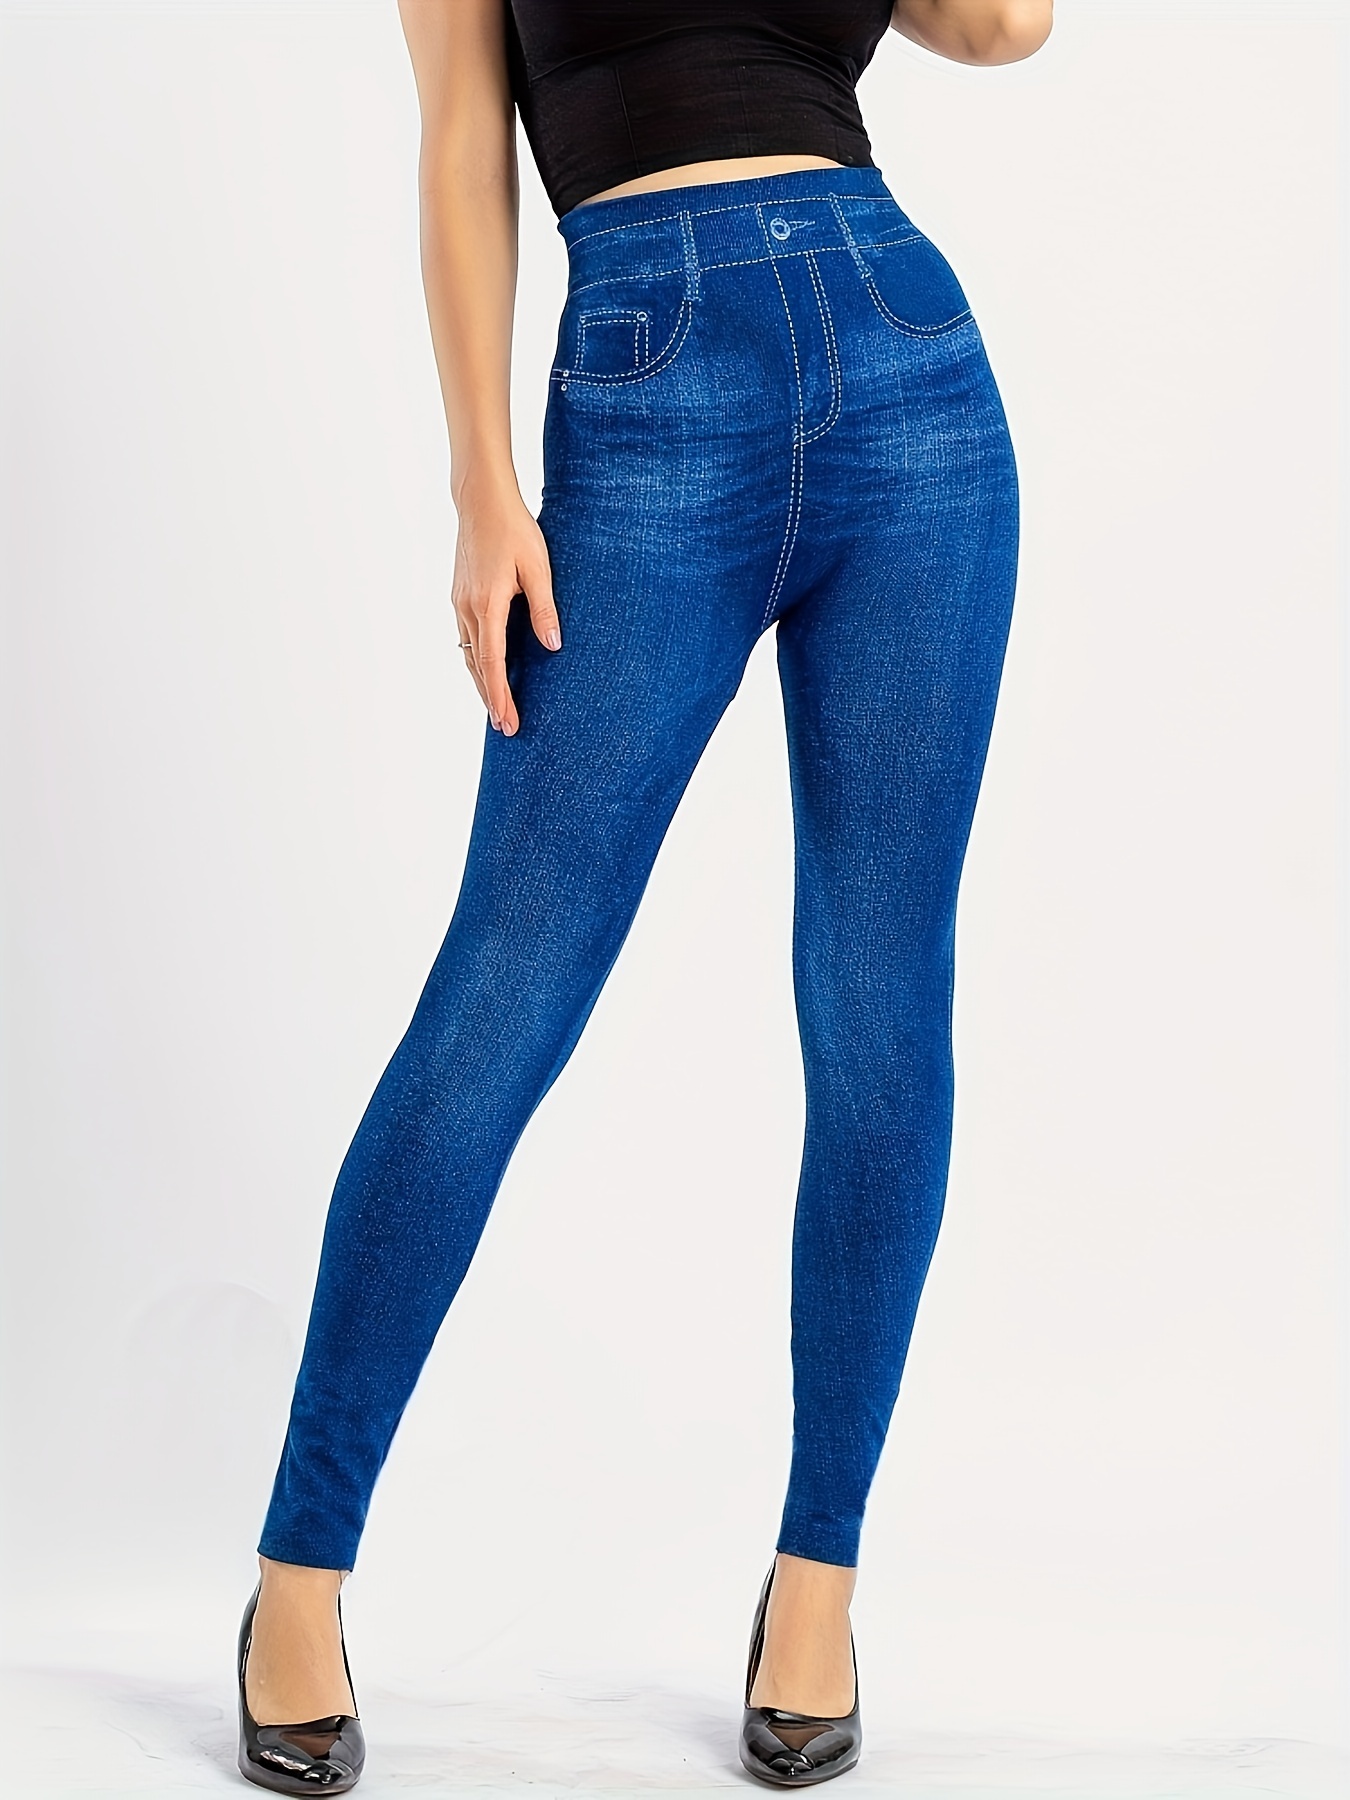 Shop for Jeggings, Jeans, Womens